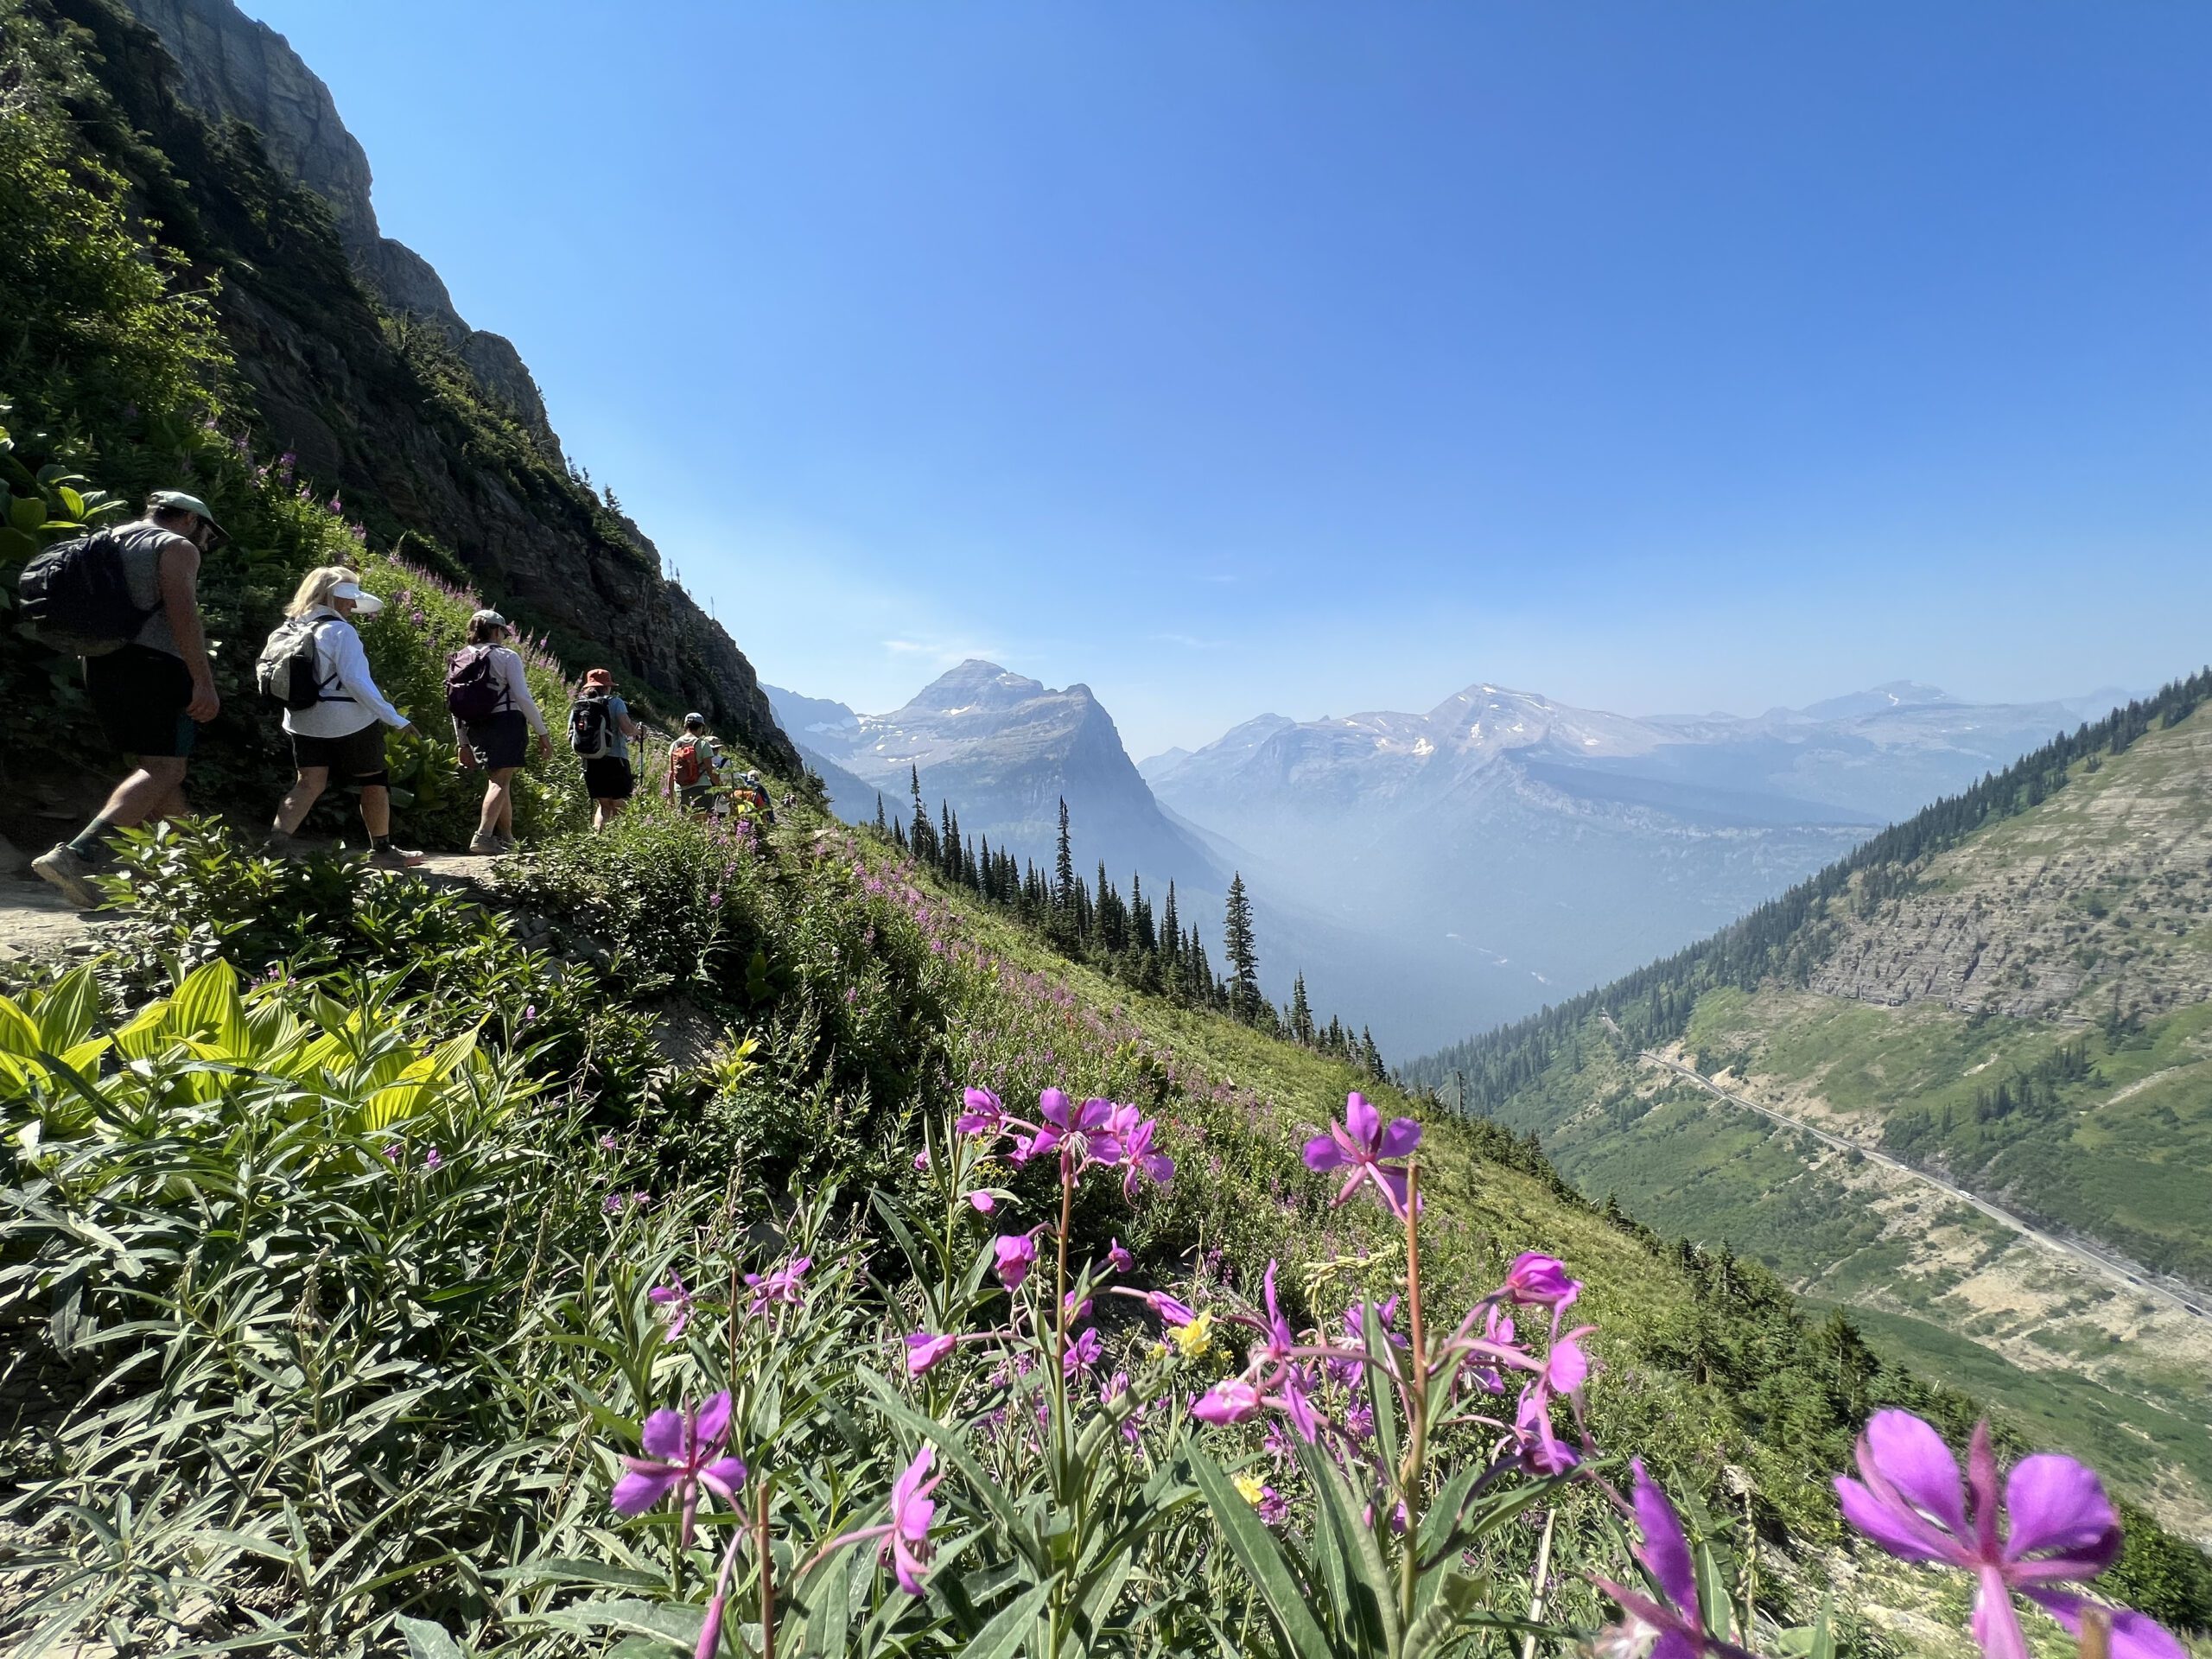 Experience an iconic hike in Glacier National Park